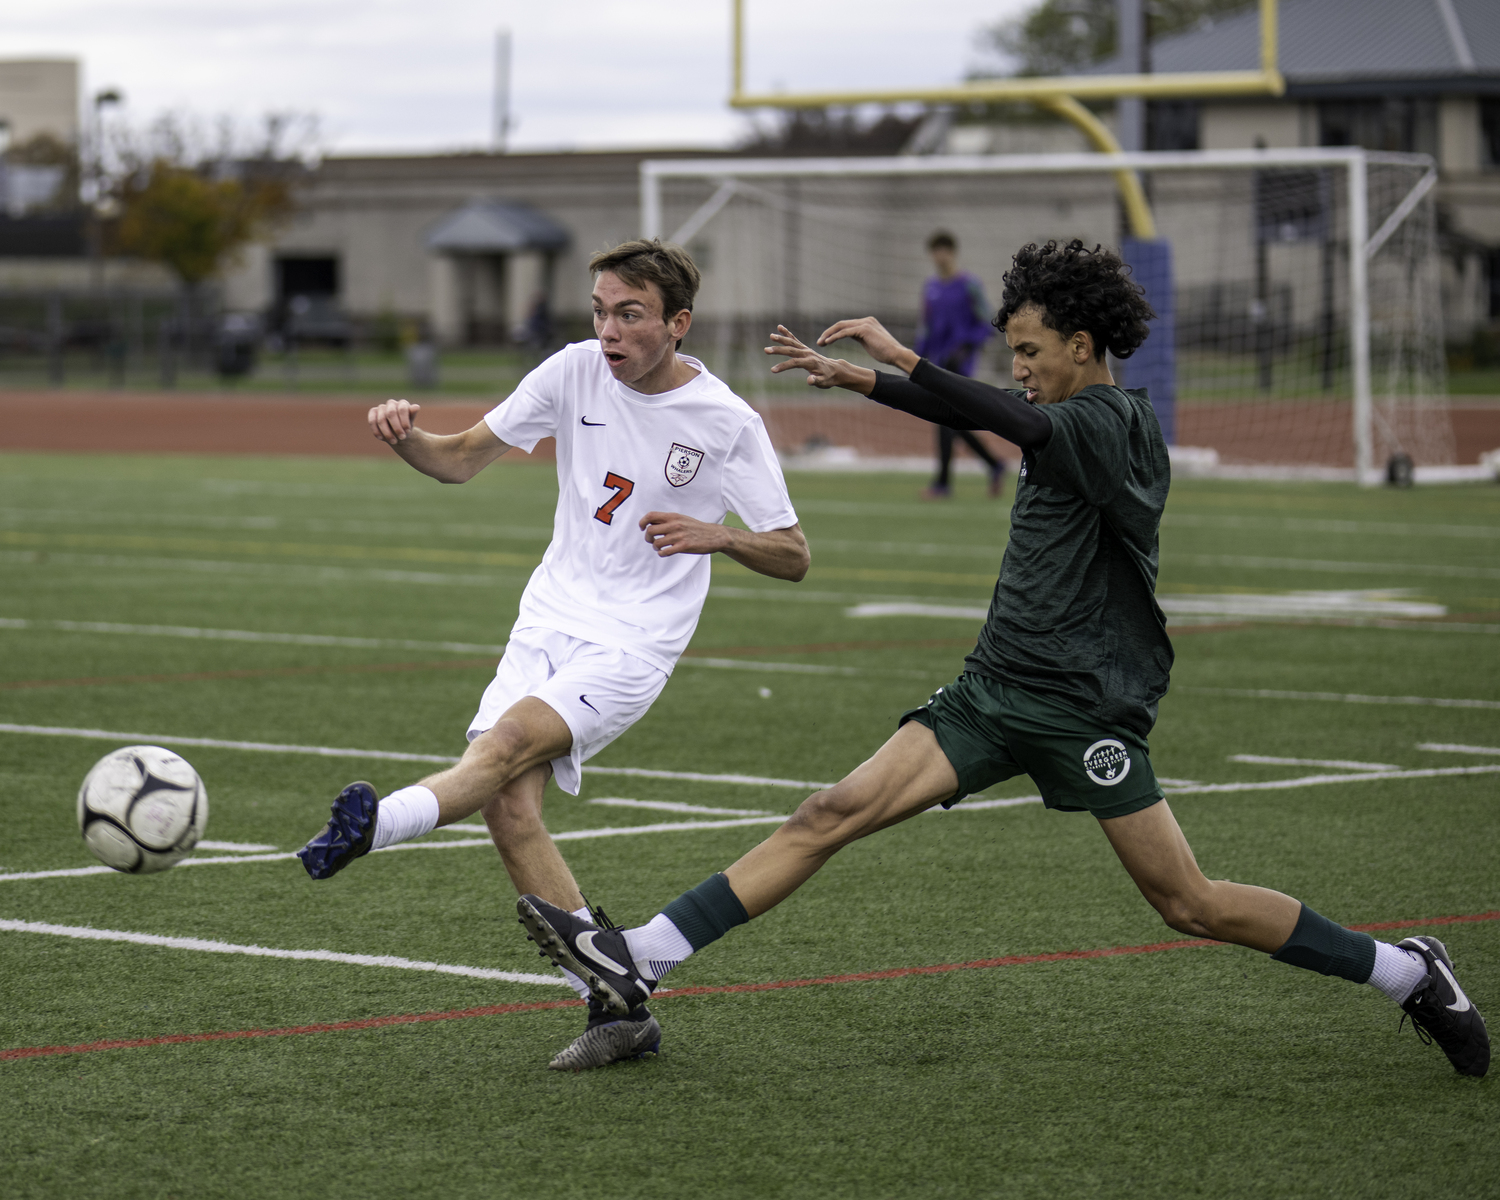 Pierson senior Ryder Esposito clears the ball before an Evergeeen Charter gets to it.  MARIANNE BARNETT